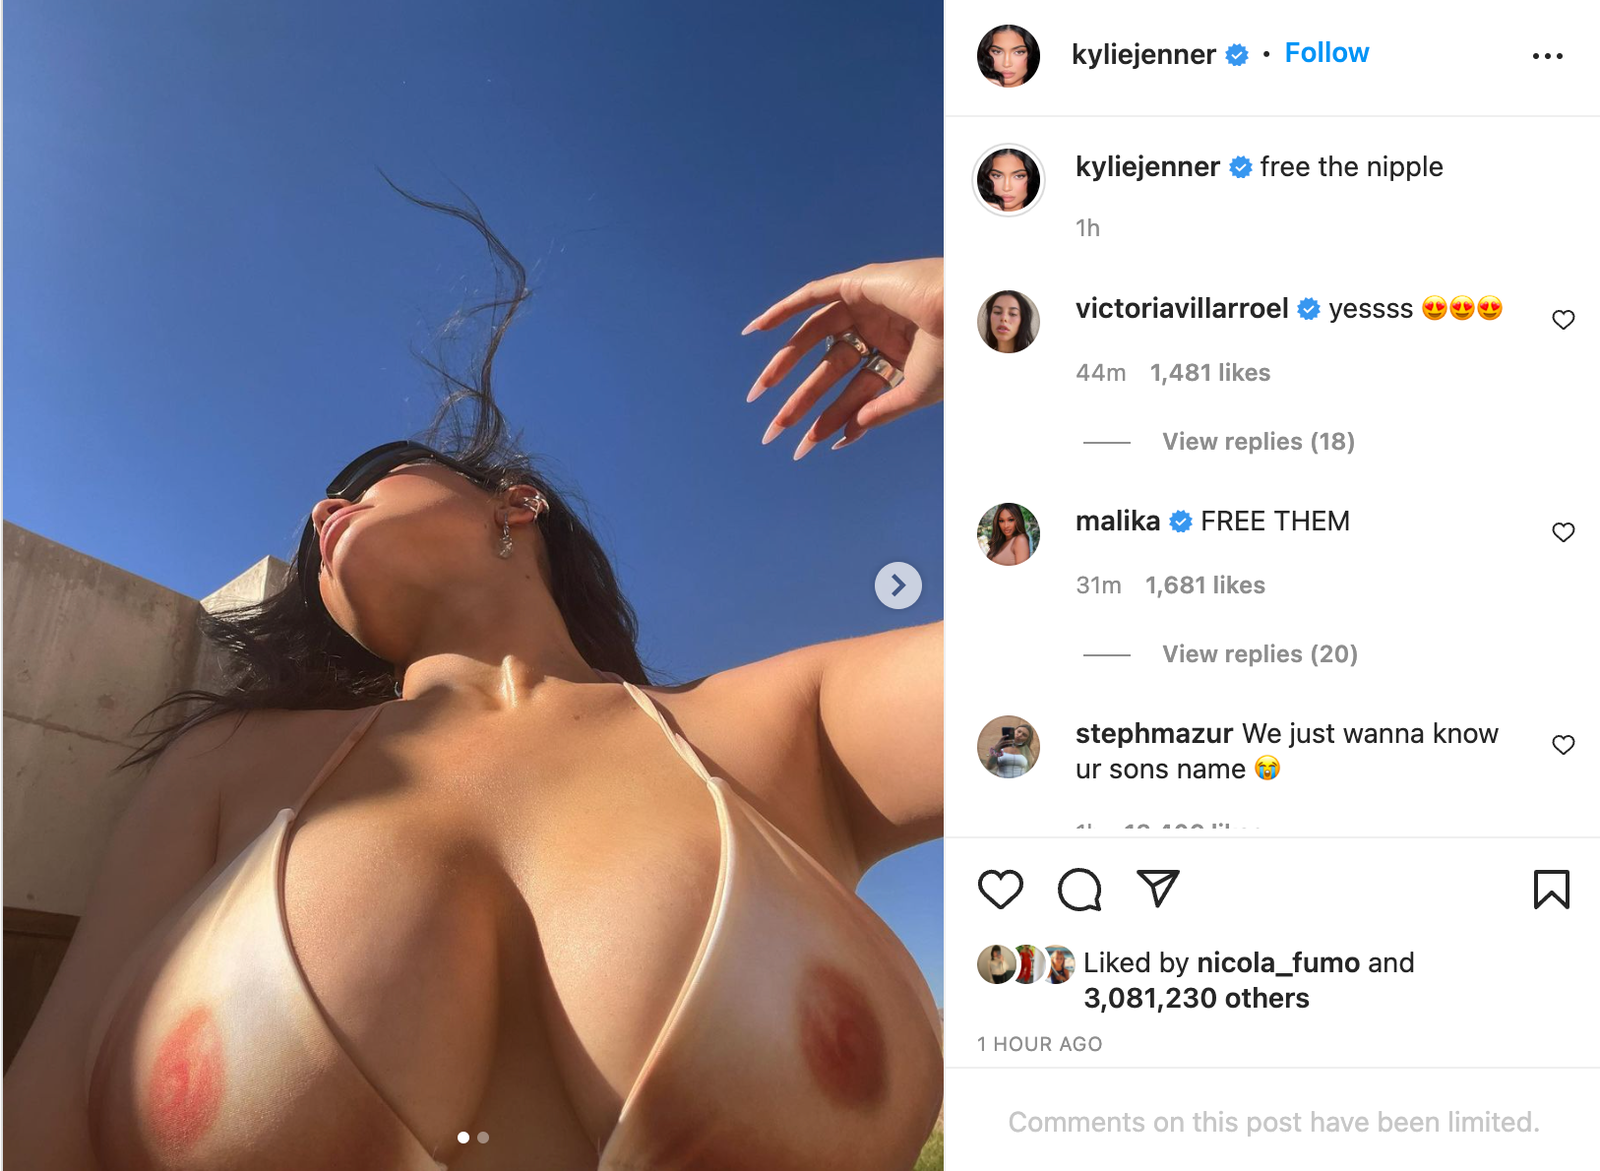 daisy leonard recommends kylie jenner porn captions pic